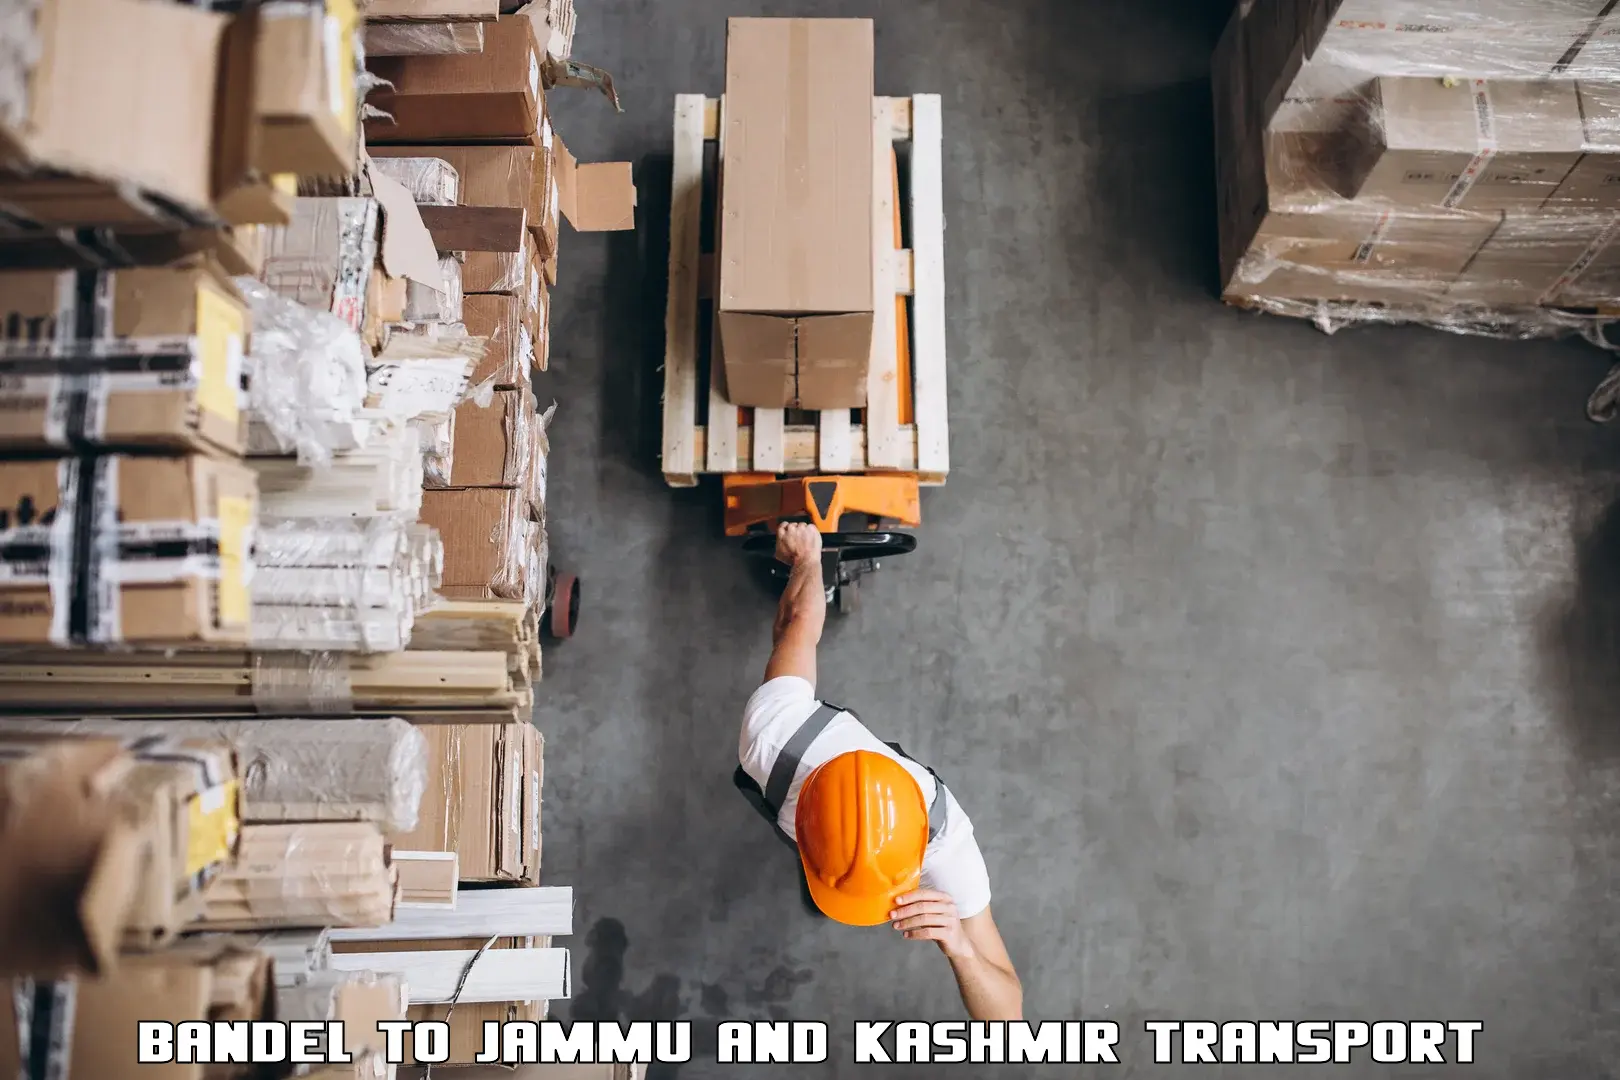 Container transport service Bandel to Jammu and Kashmir